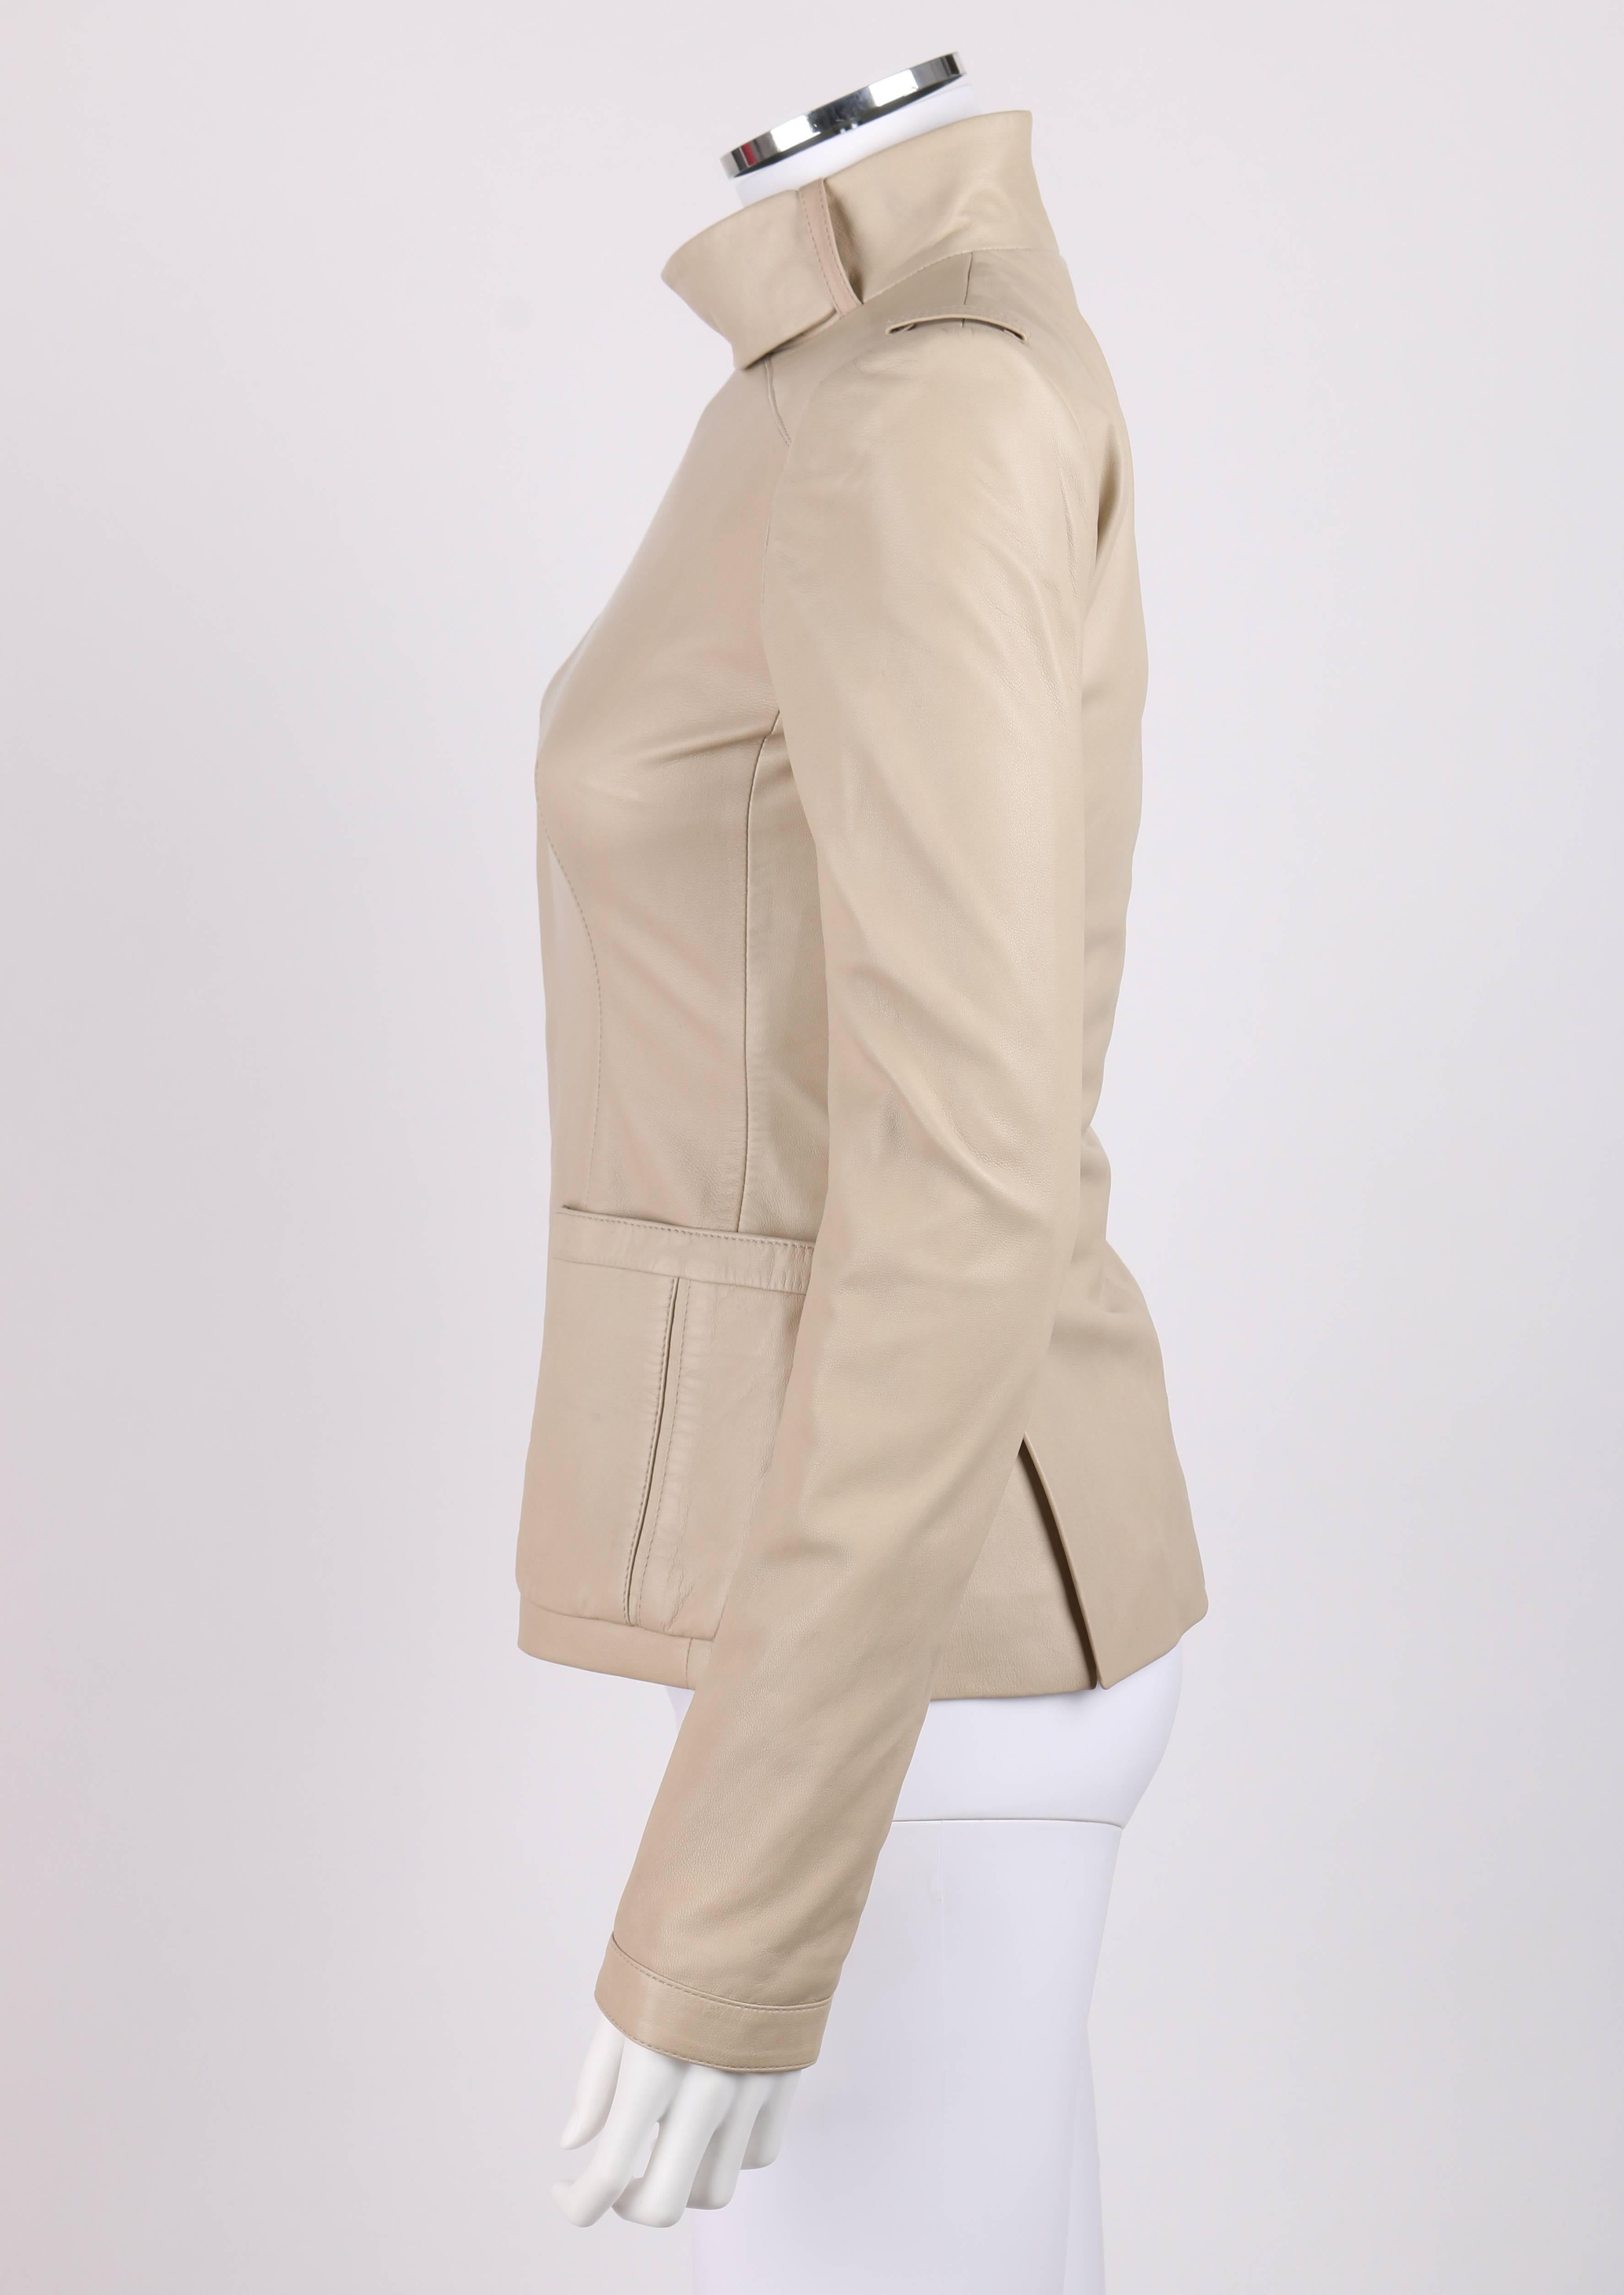 BALENCIAGA Pre-Fall 2010 Beige Lambskin Leather Asymmetrical Closure Jacket  In Good Condition For Sale In Thiensville, WI